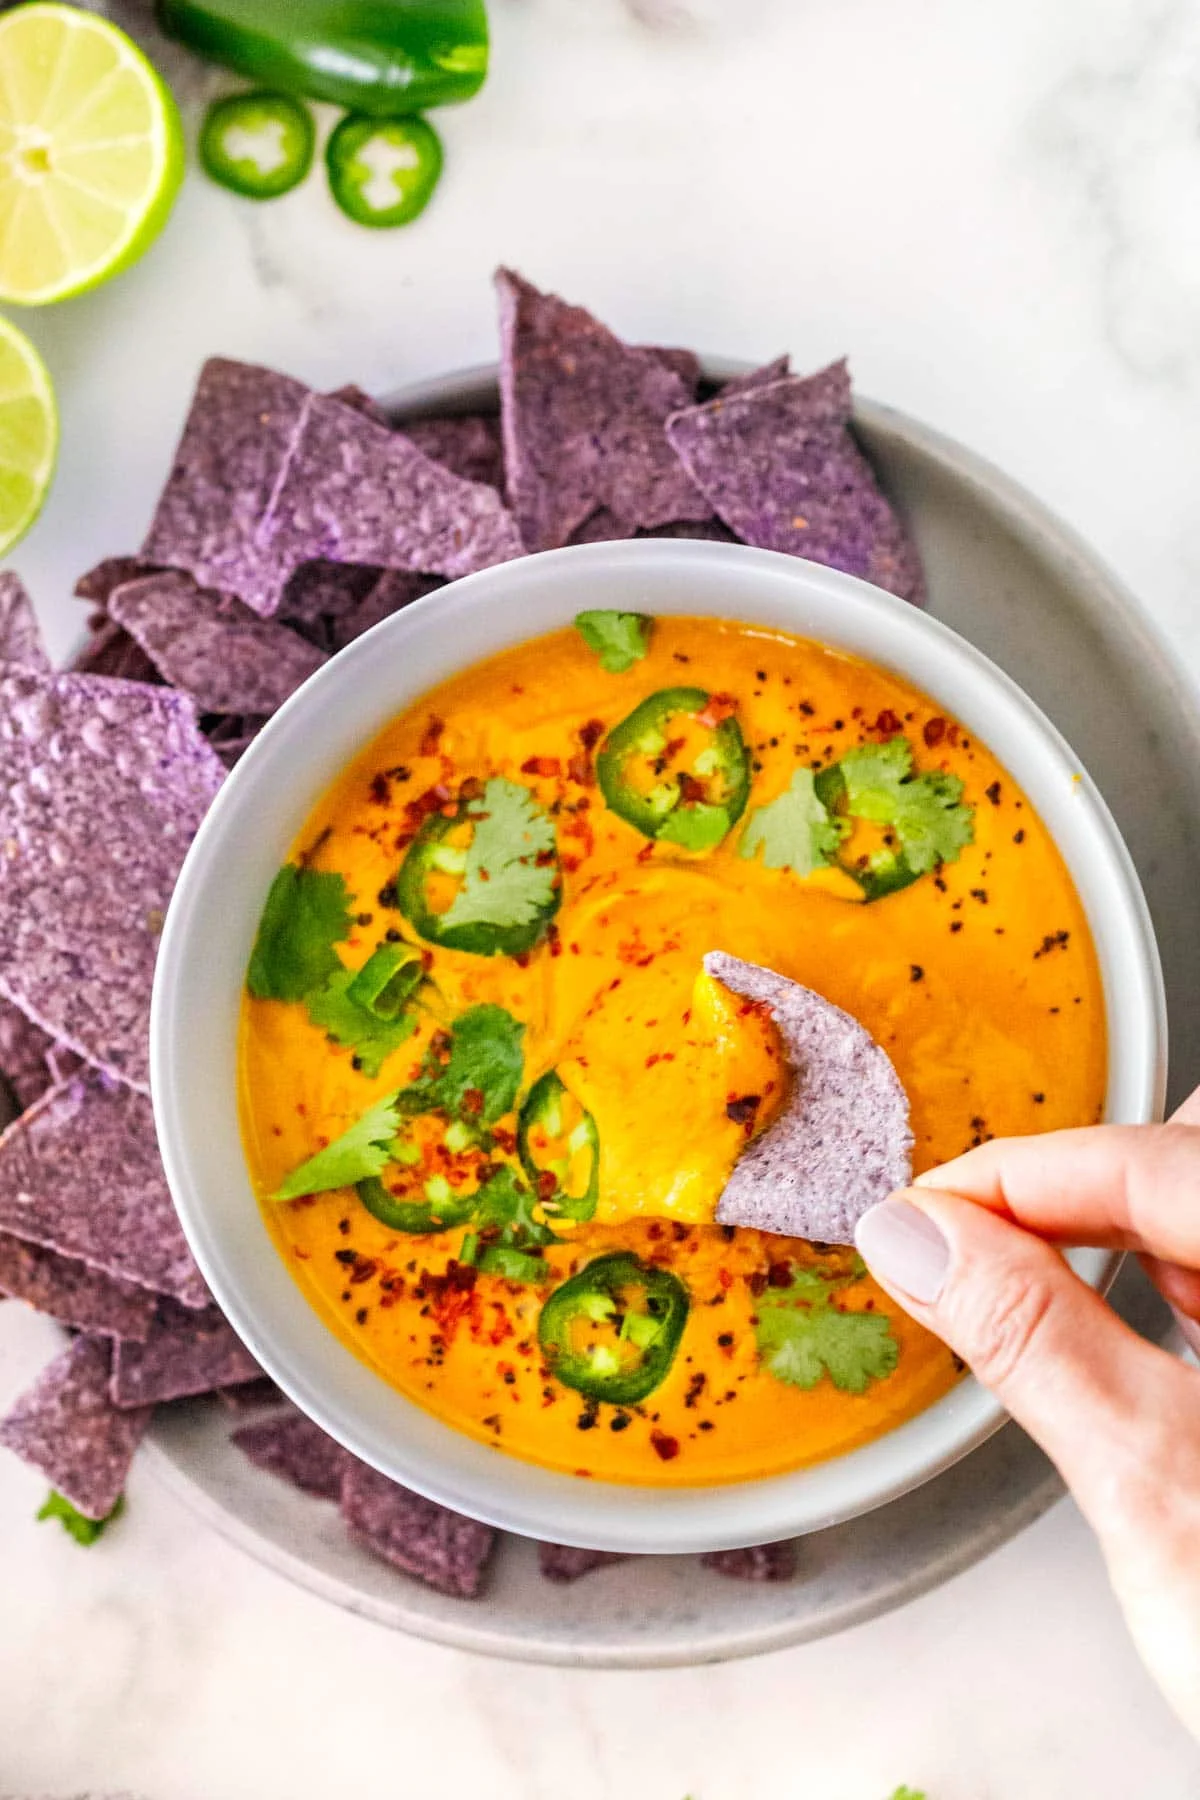 vegan queso dip in a bowl with jalapeños, scallions, cilantro, and red pepper flakes and a hand dipping a tortilla chips in.